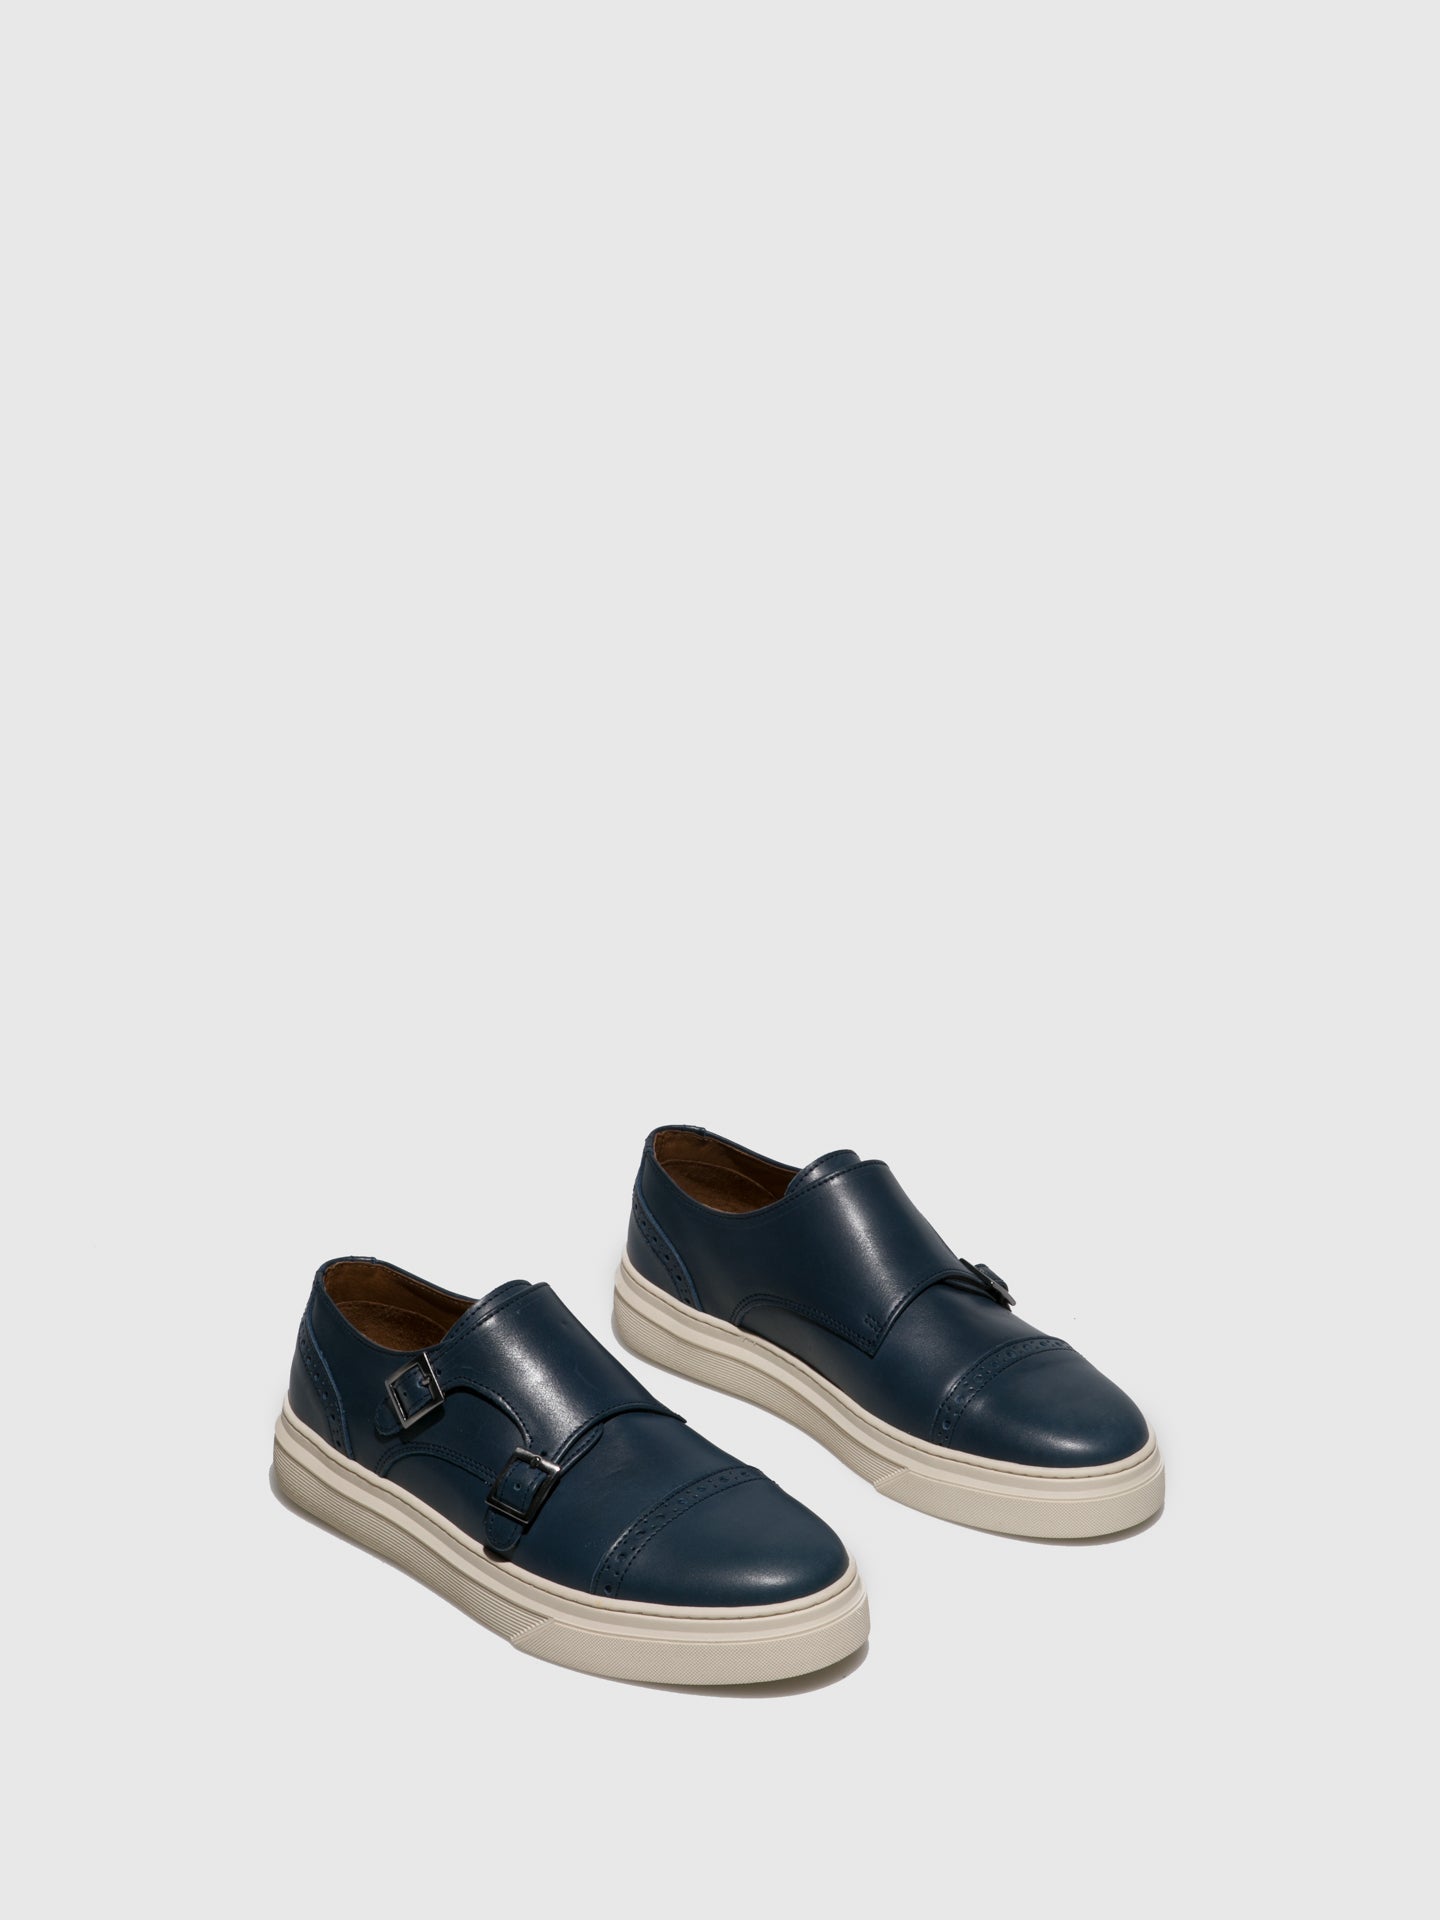 Fungi Blue Buckle Shoes